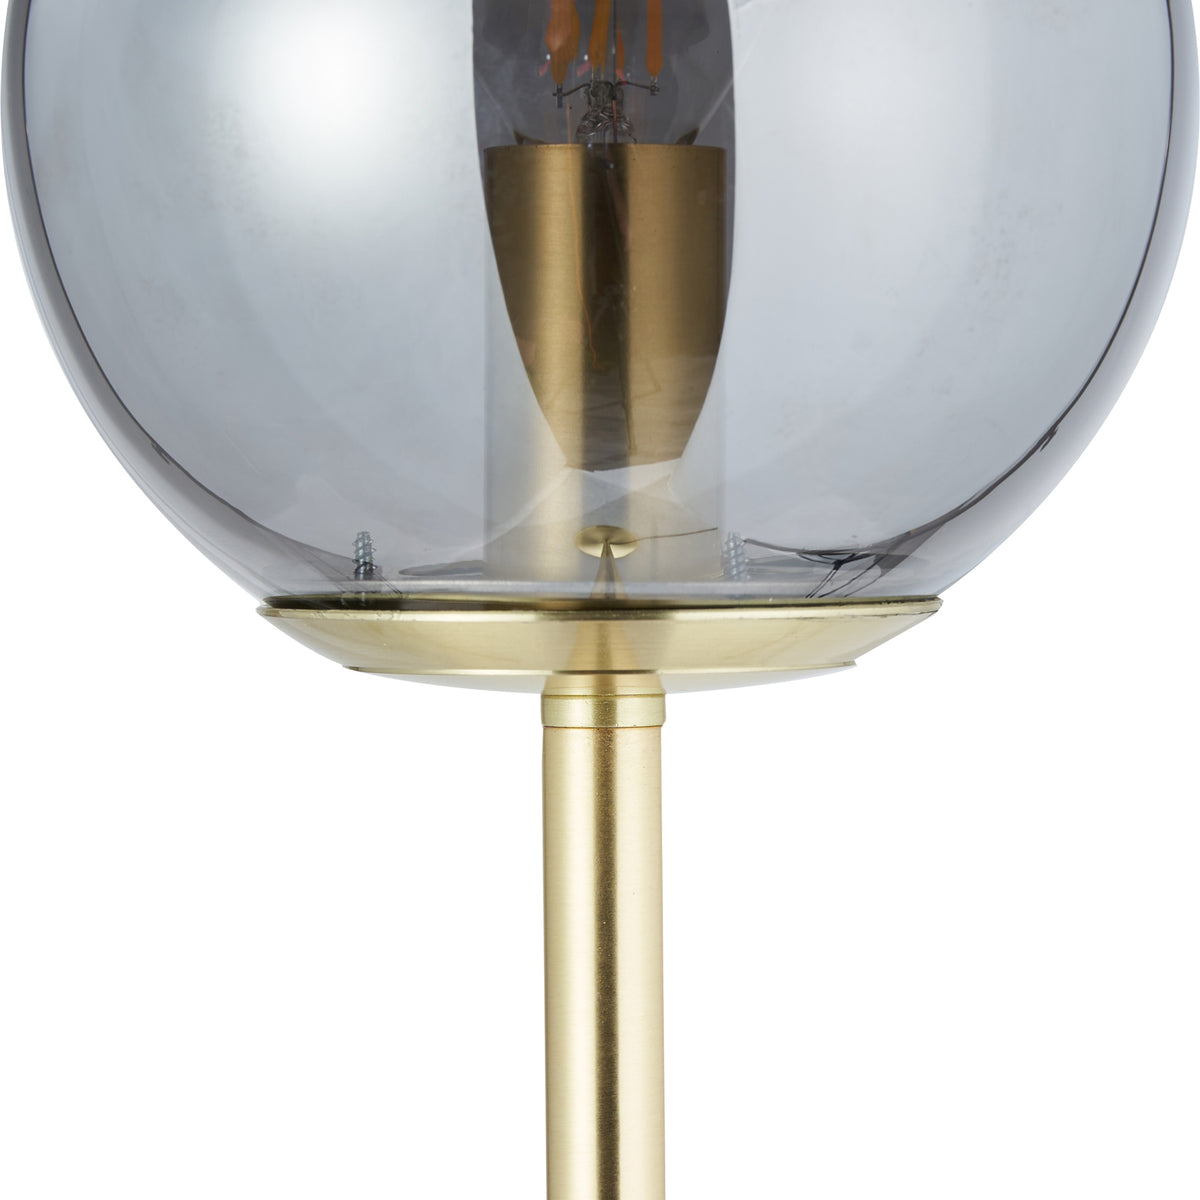 Arabella Smoked Glass Orb and Gold Metal Floor Lamp